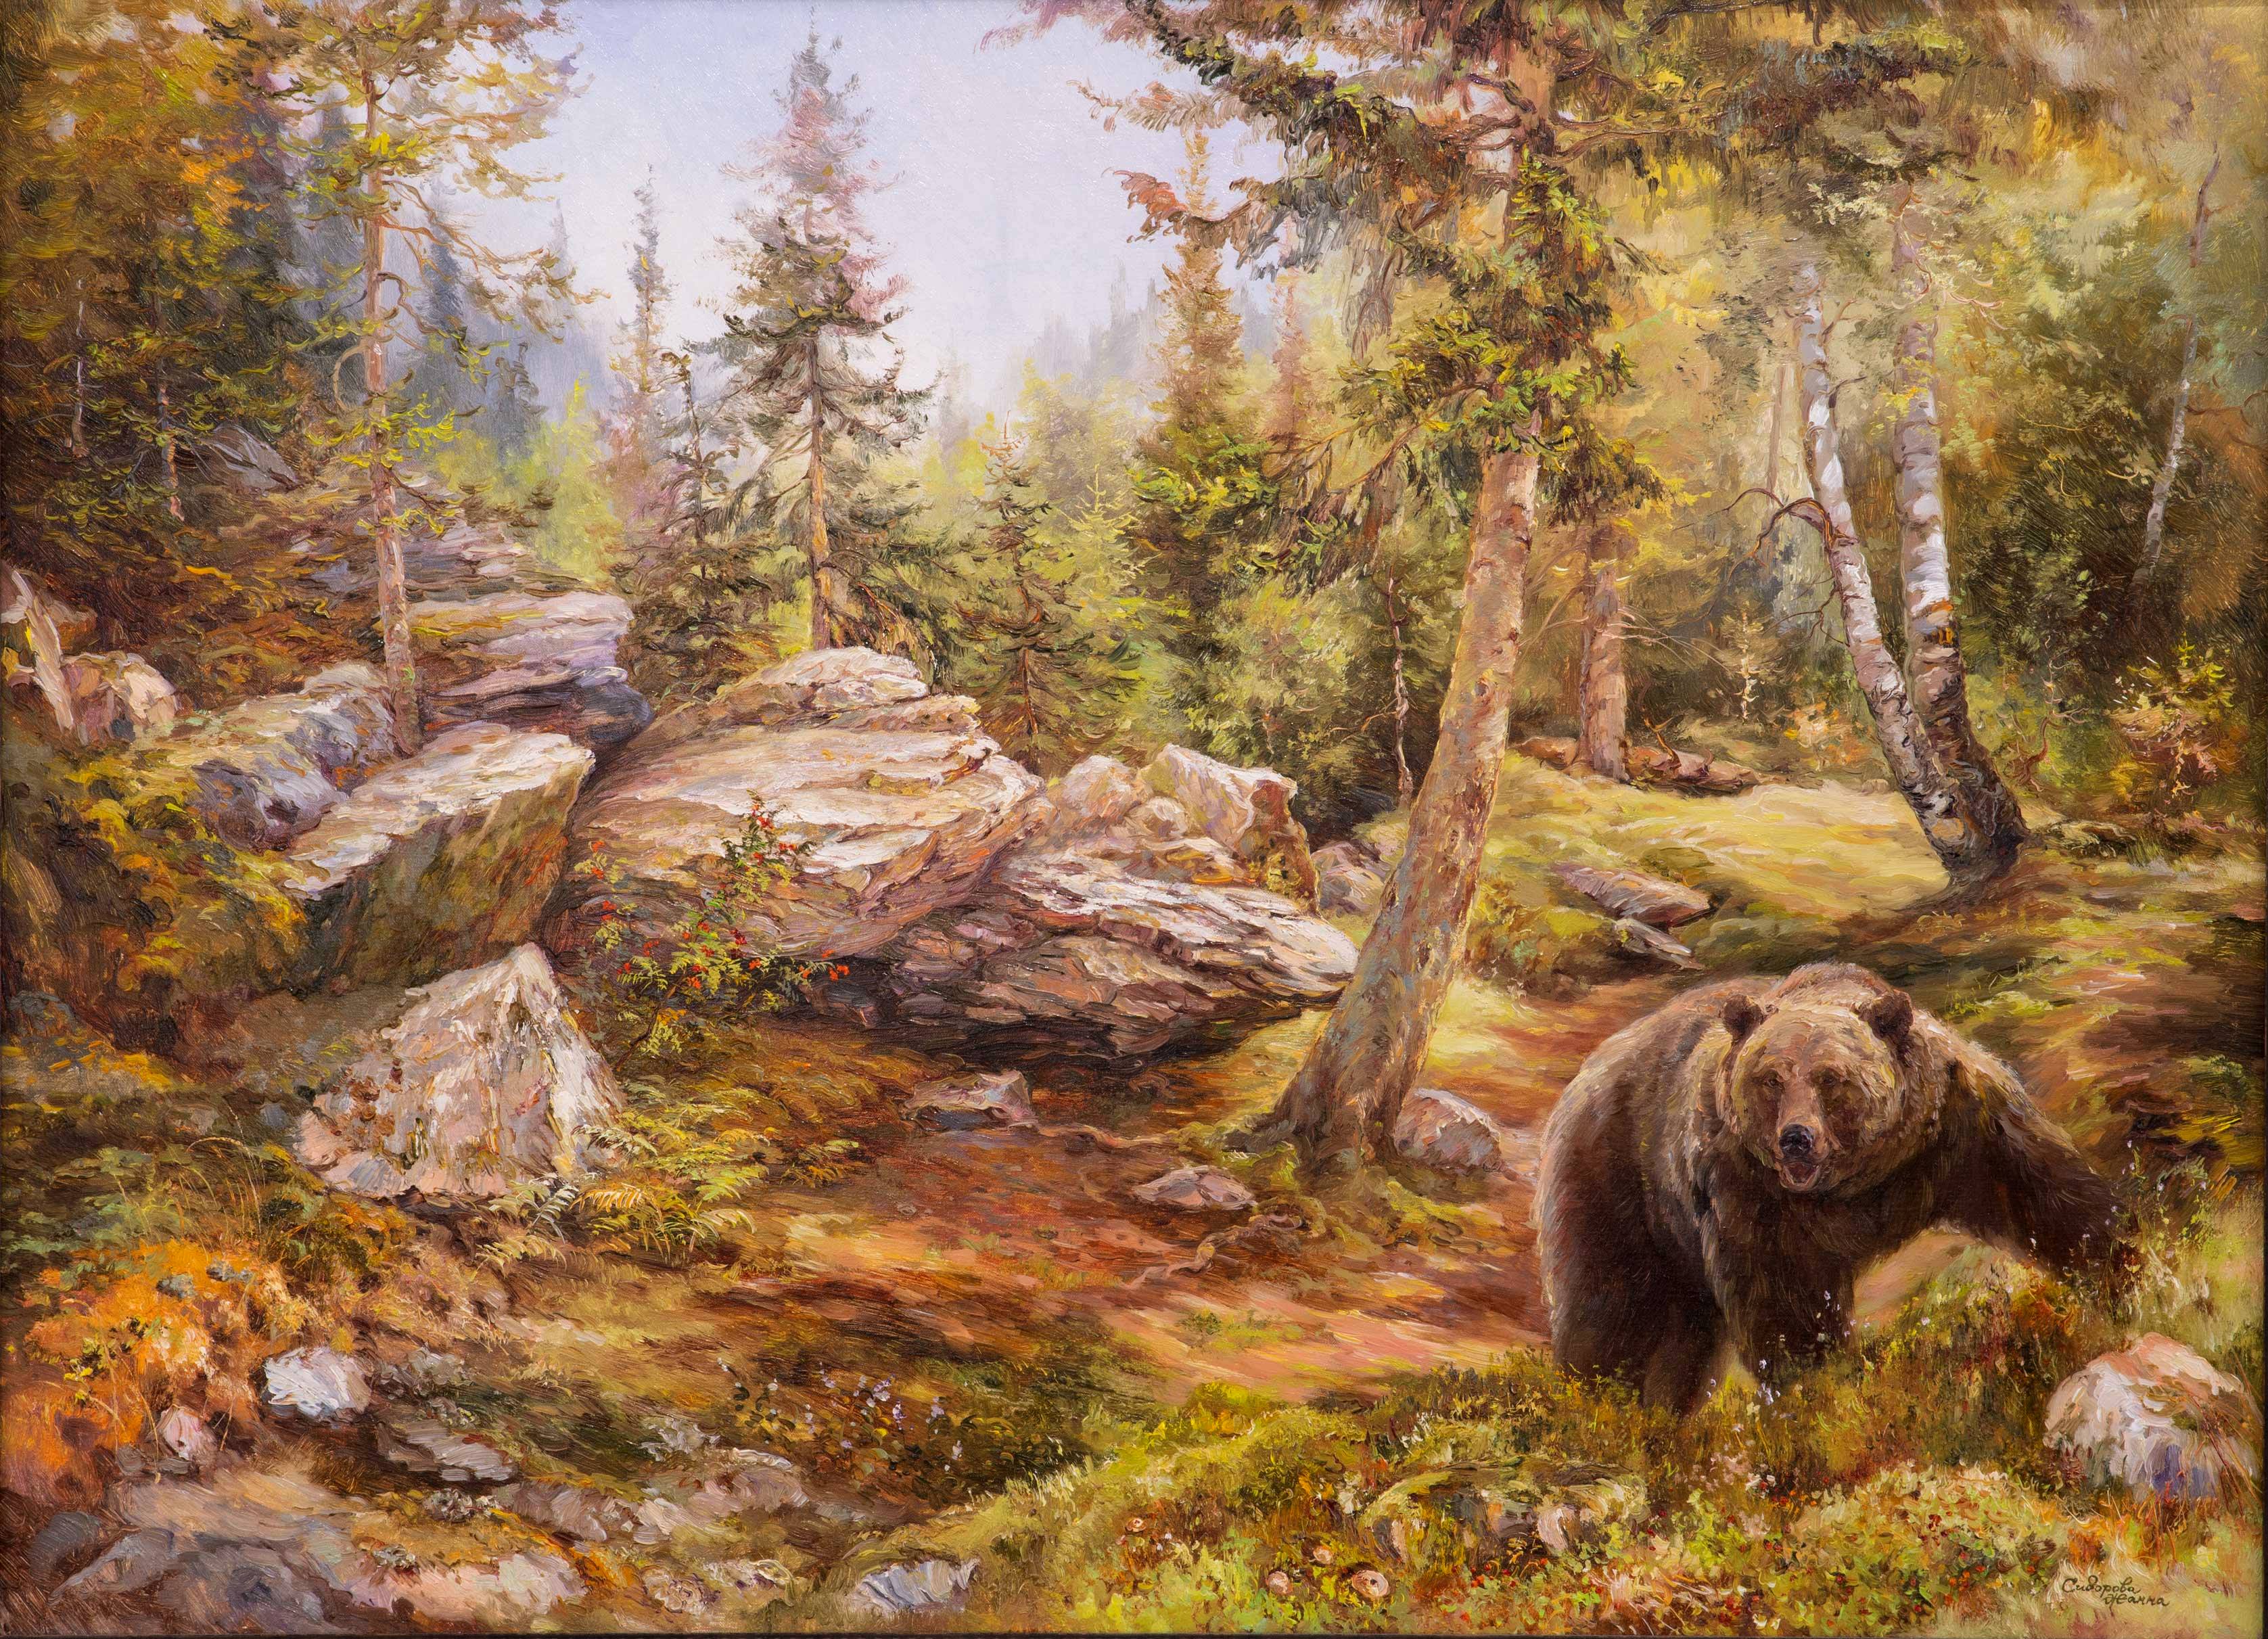 Brown Bear Is Watching His Possessions - 1, Zhanna Sidorova, 买画 油